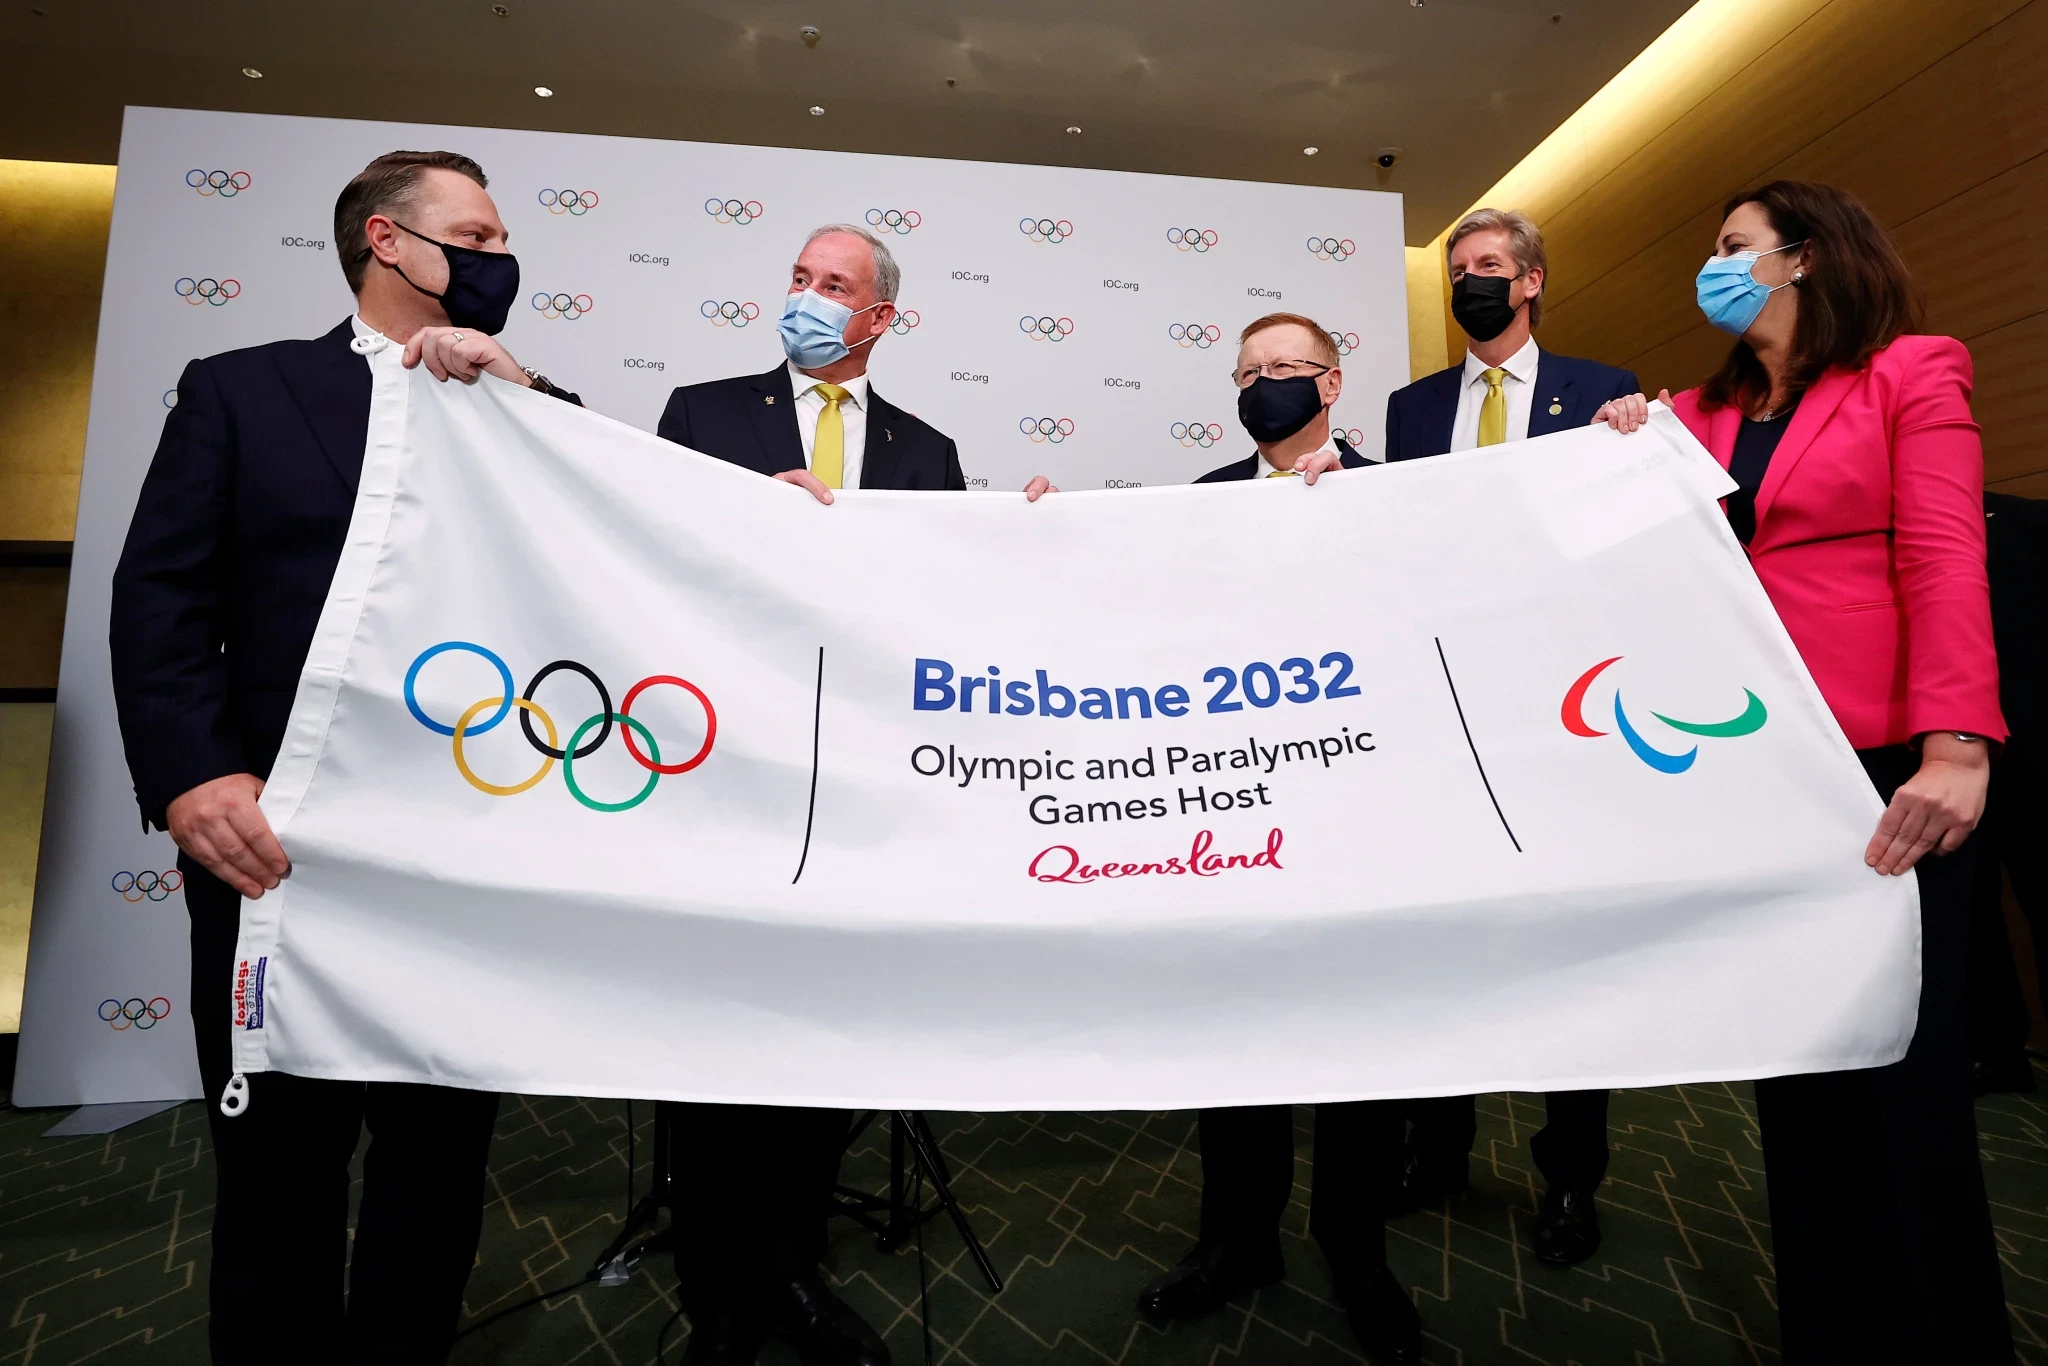 A consortium to develop a legacy strategy and plan for the 2032 Olympic and Paralympic Games in Brisbane has been announced ©Getty Images